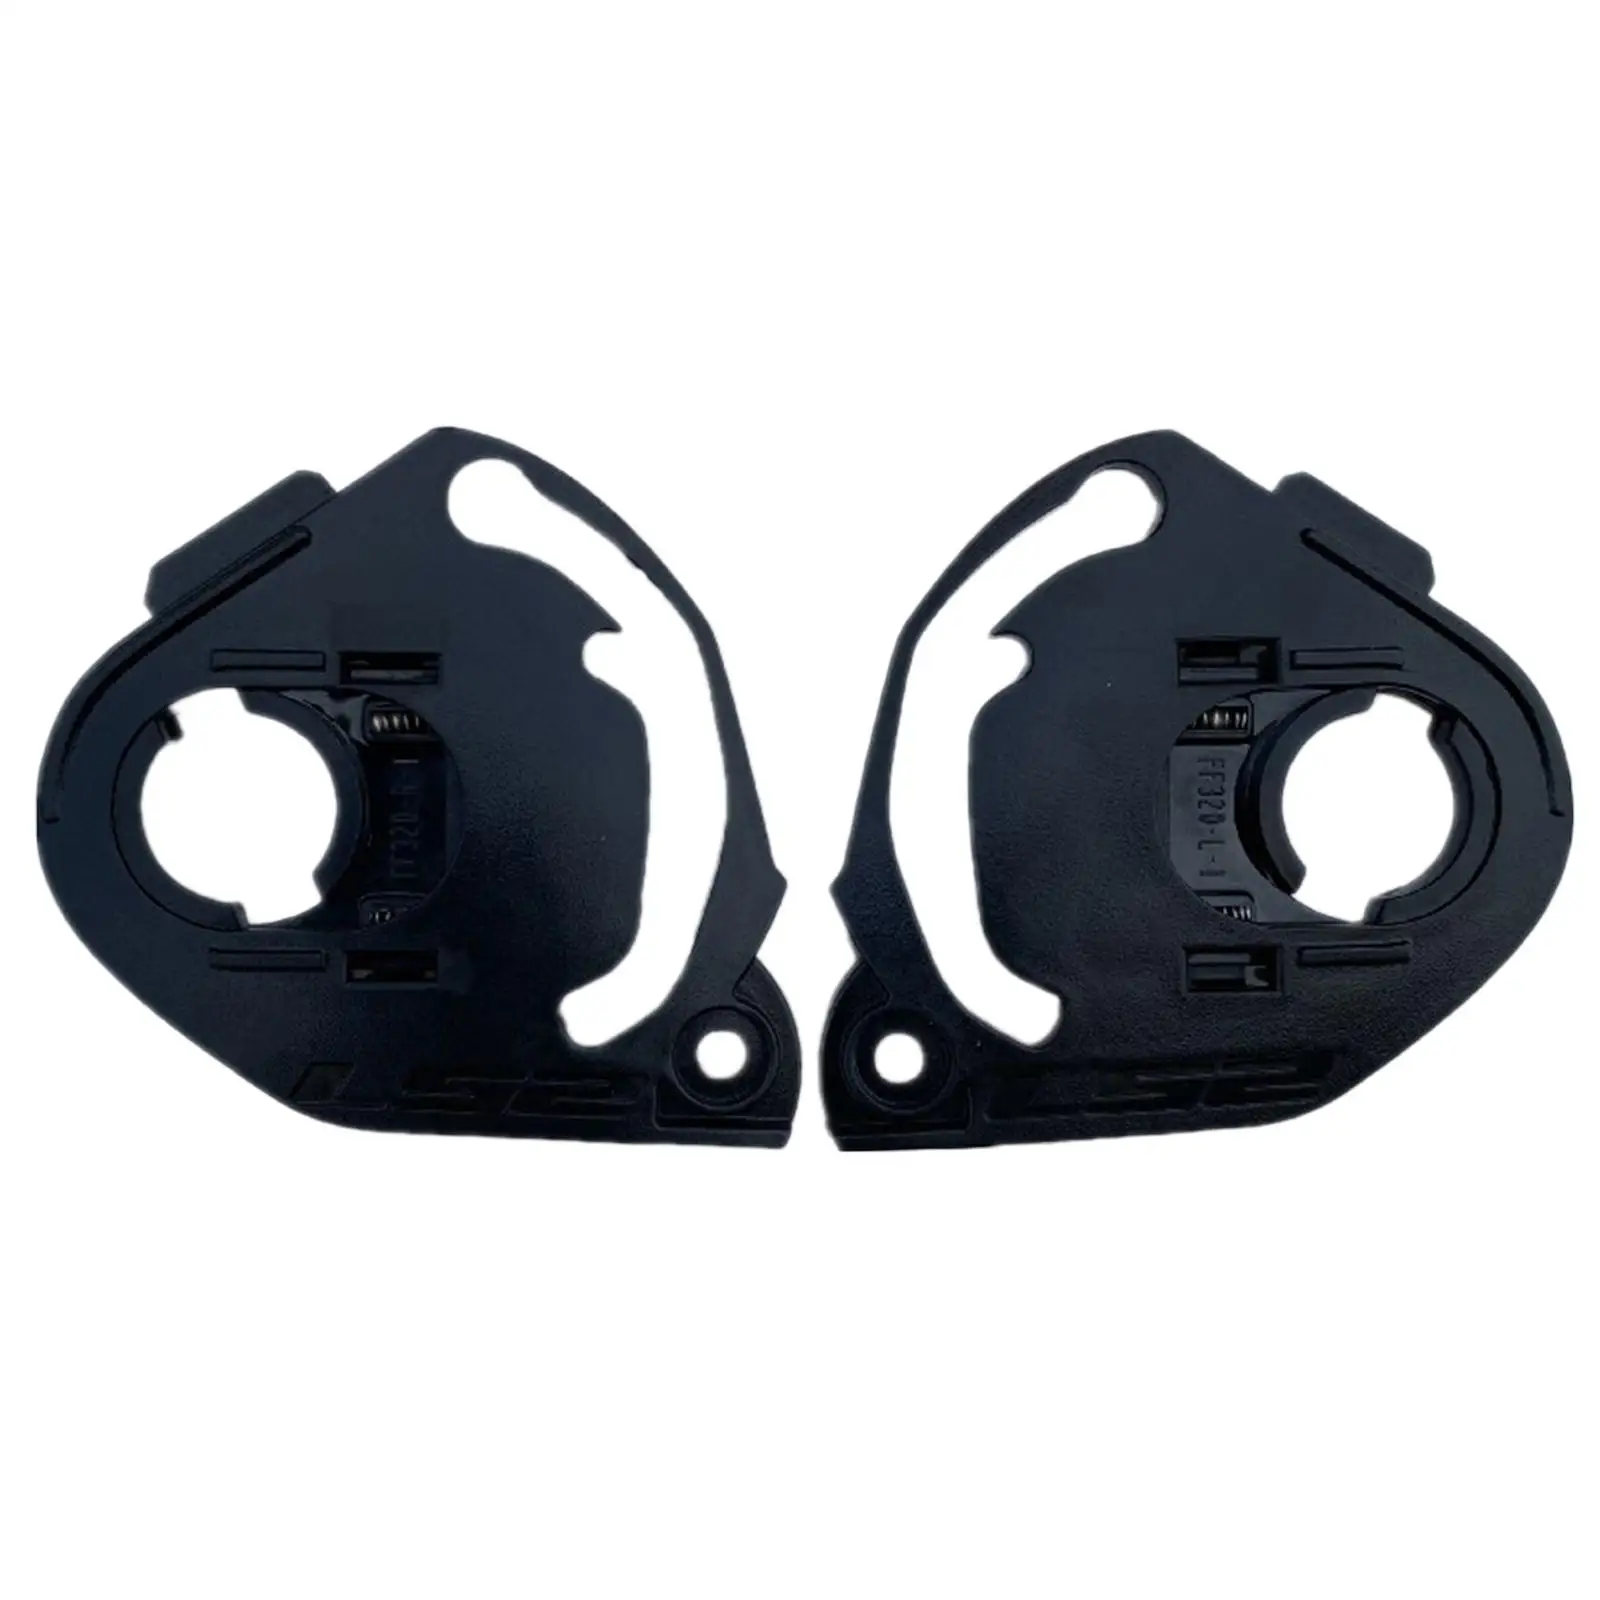 2x Motorcycles  , Replacement   Visor Mounts Fits for Ff800 Ff353 353 328 320